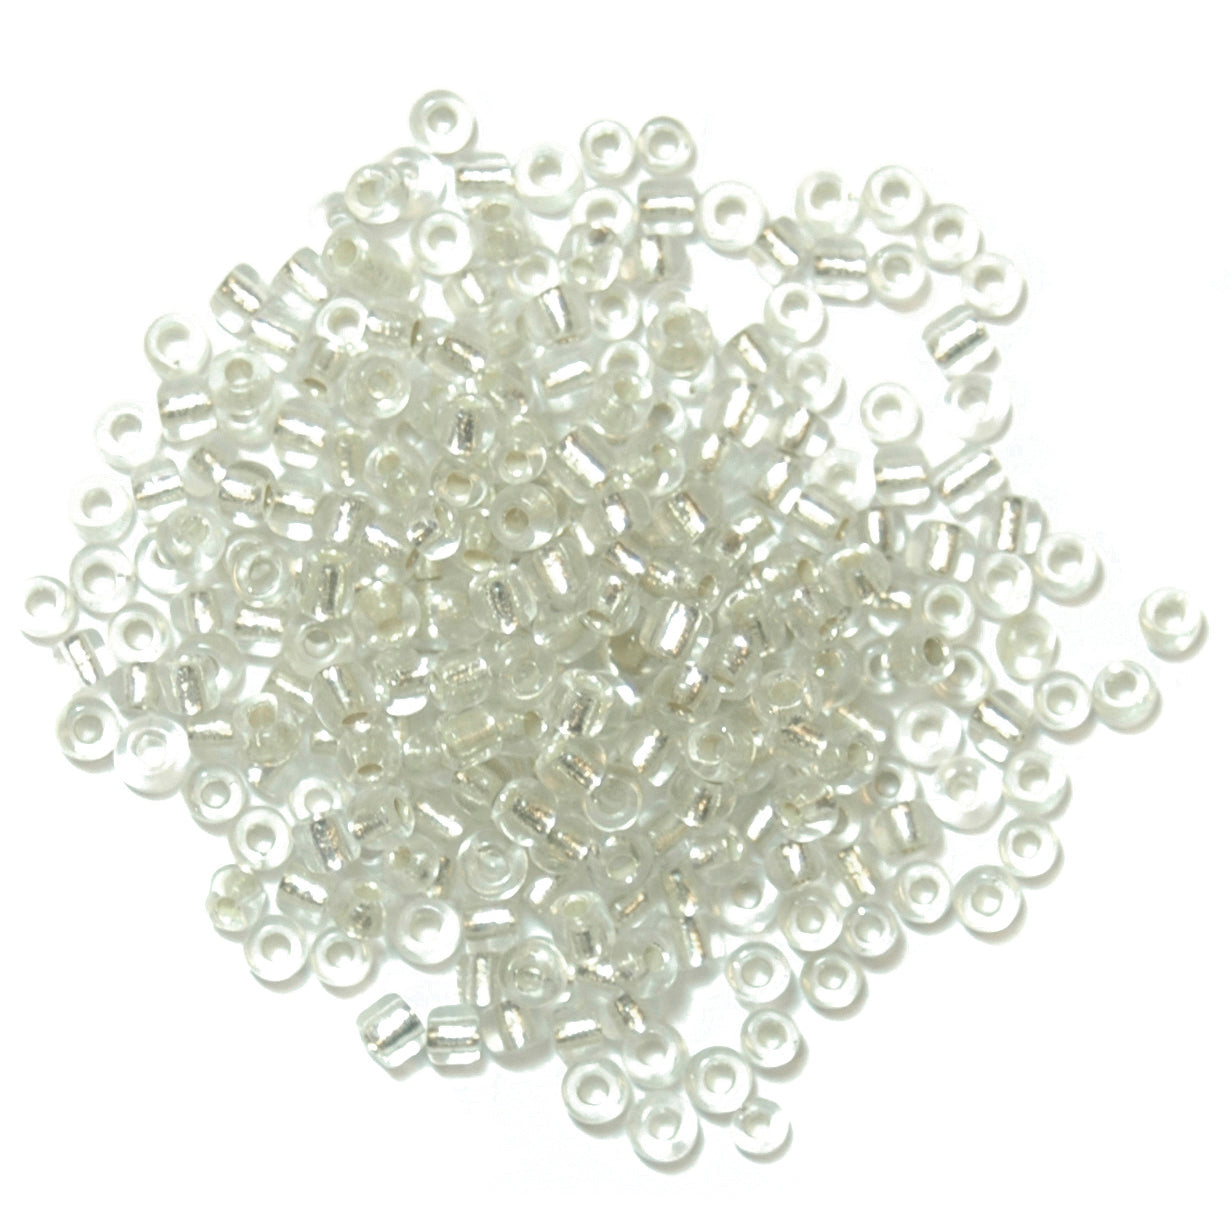 Trimits Seed Beads - 8g